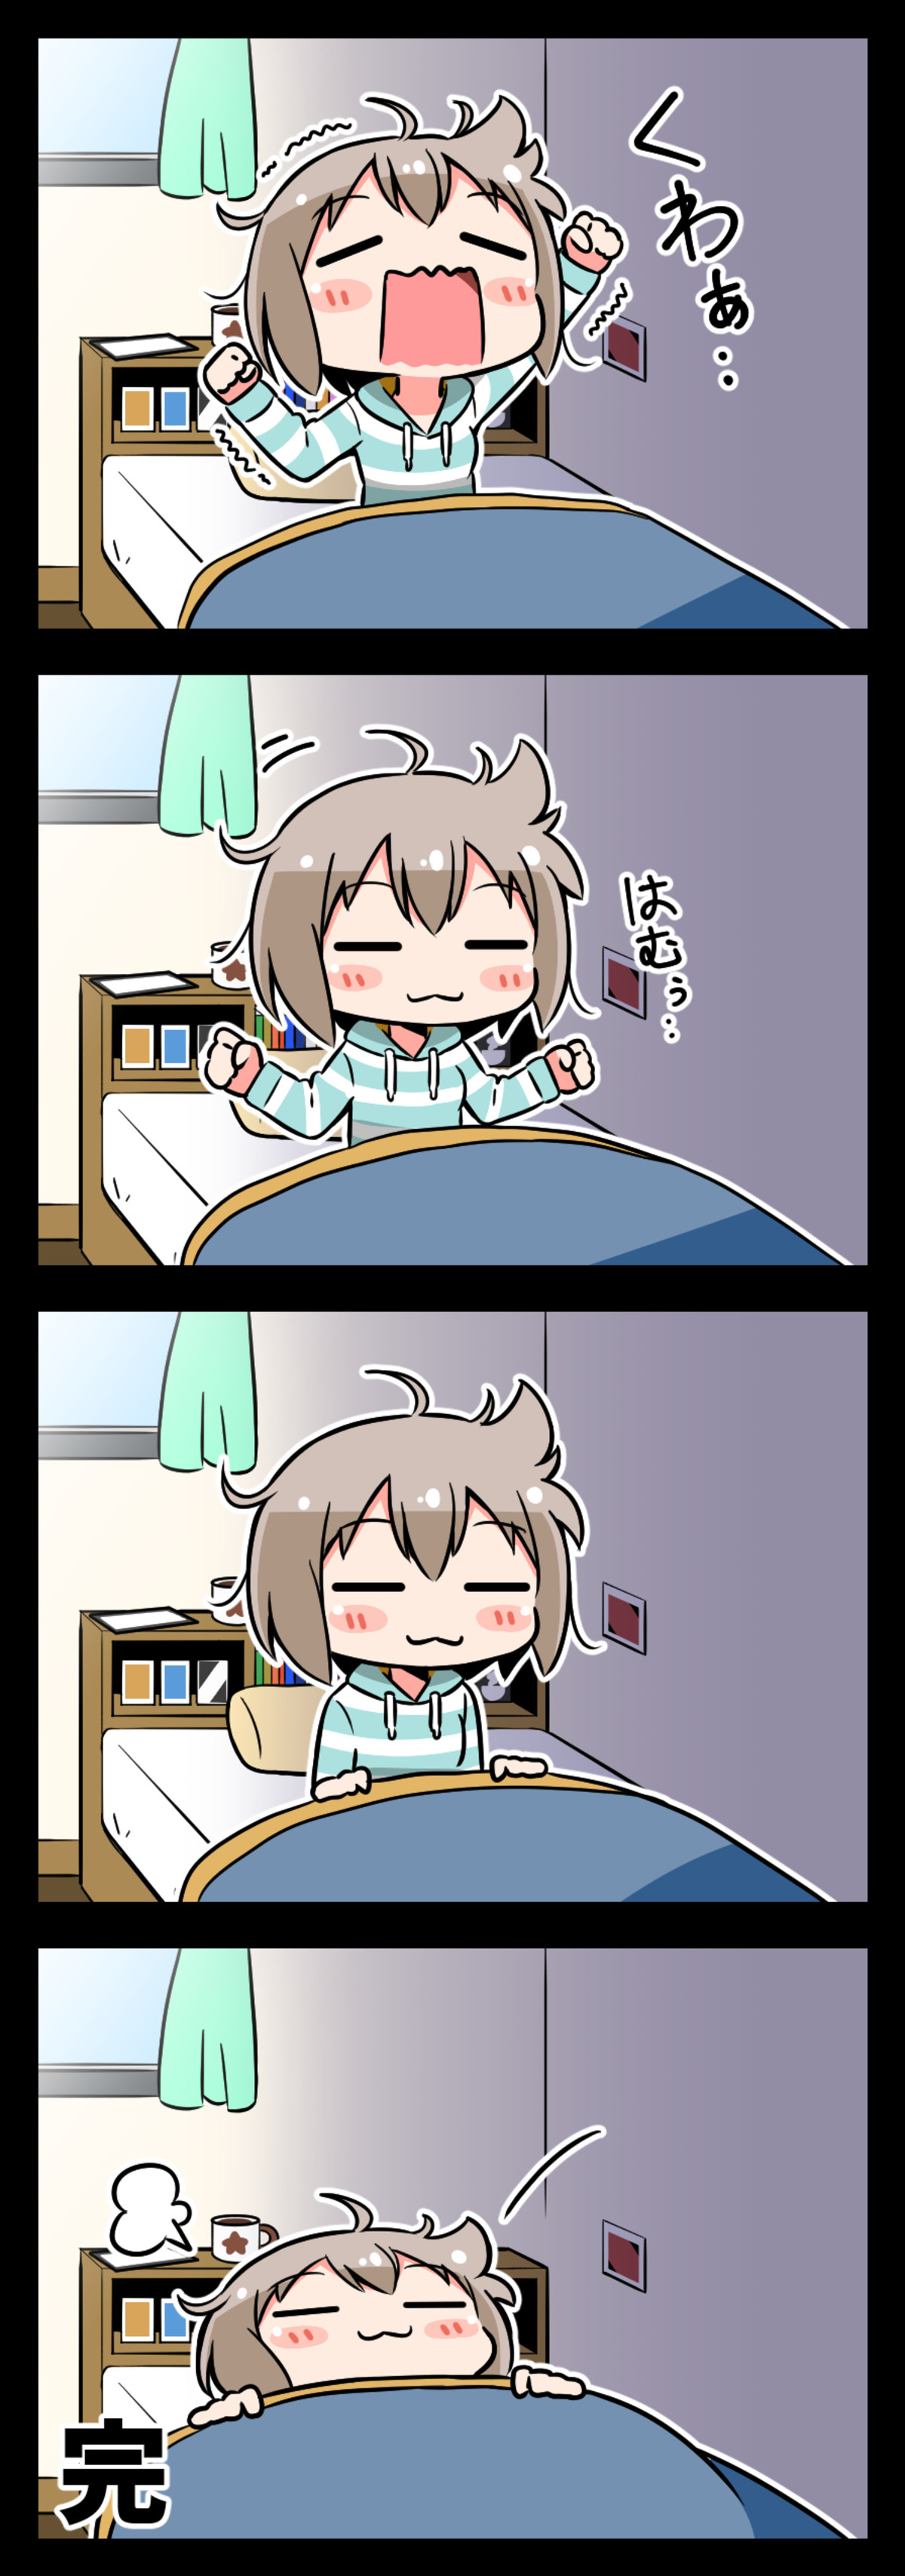 Daily BanG Dream #452. Artist's Twitter post: Girl is from BanG Dream join list: BanGDream (95 subs)Mention History &quot;モカちゃんの朝【バンドリ漫画]&quot; &quot;Moca's mor